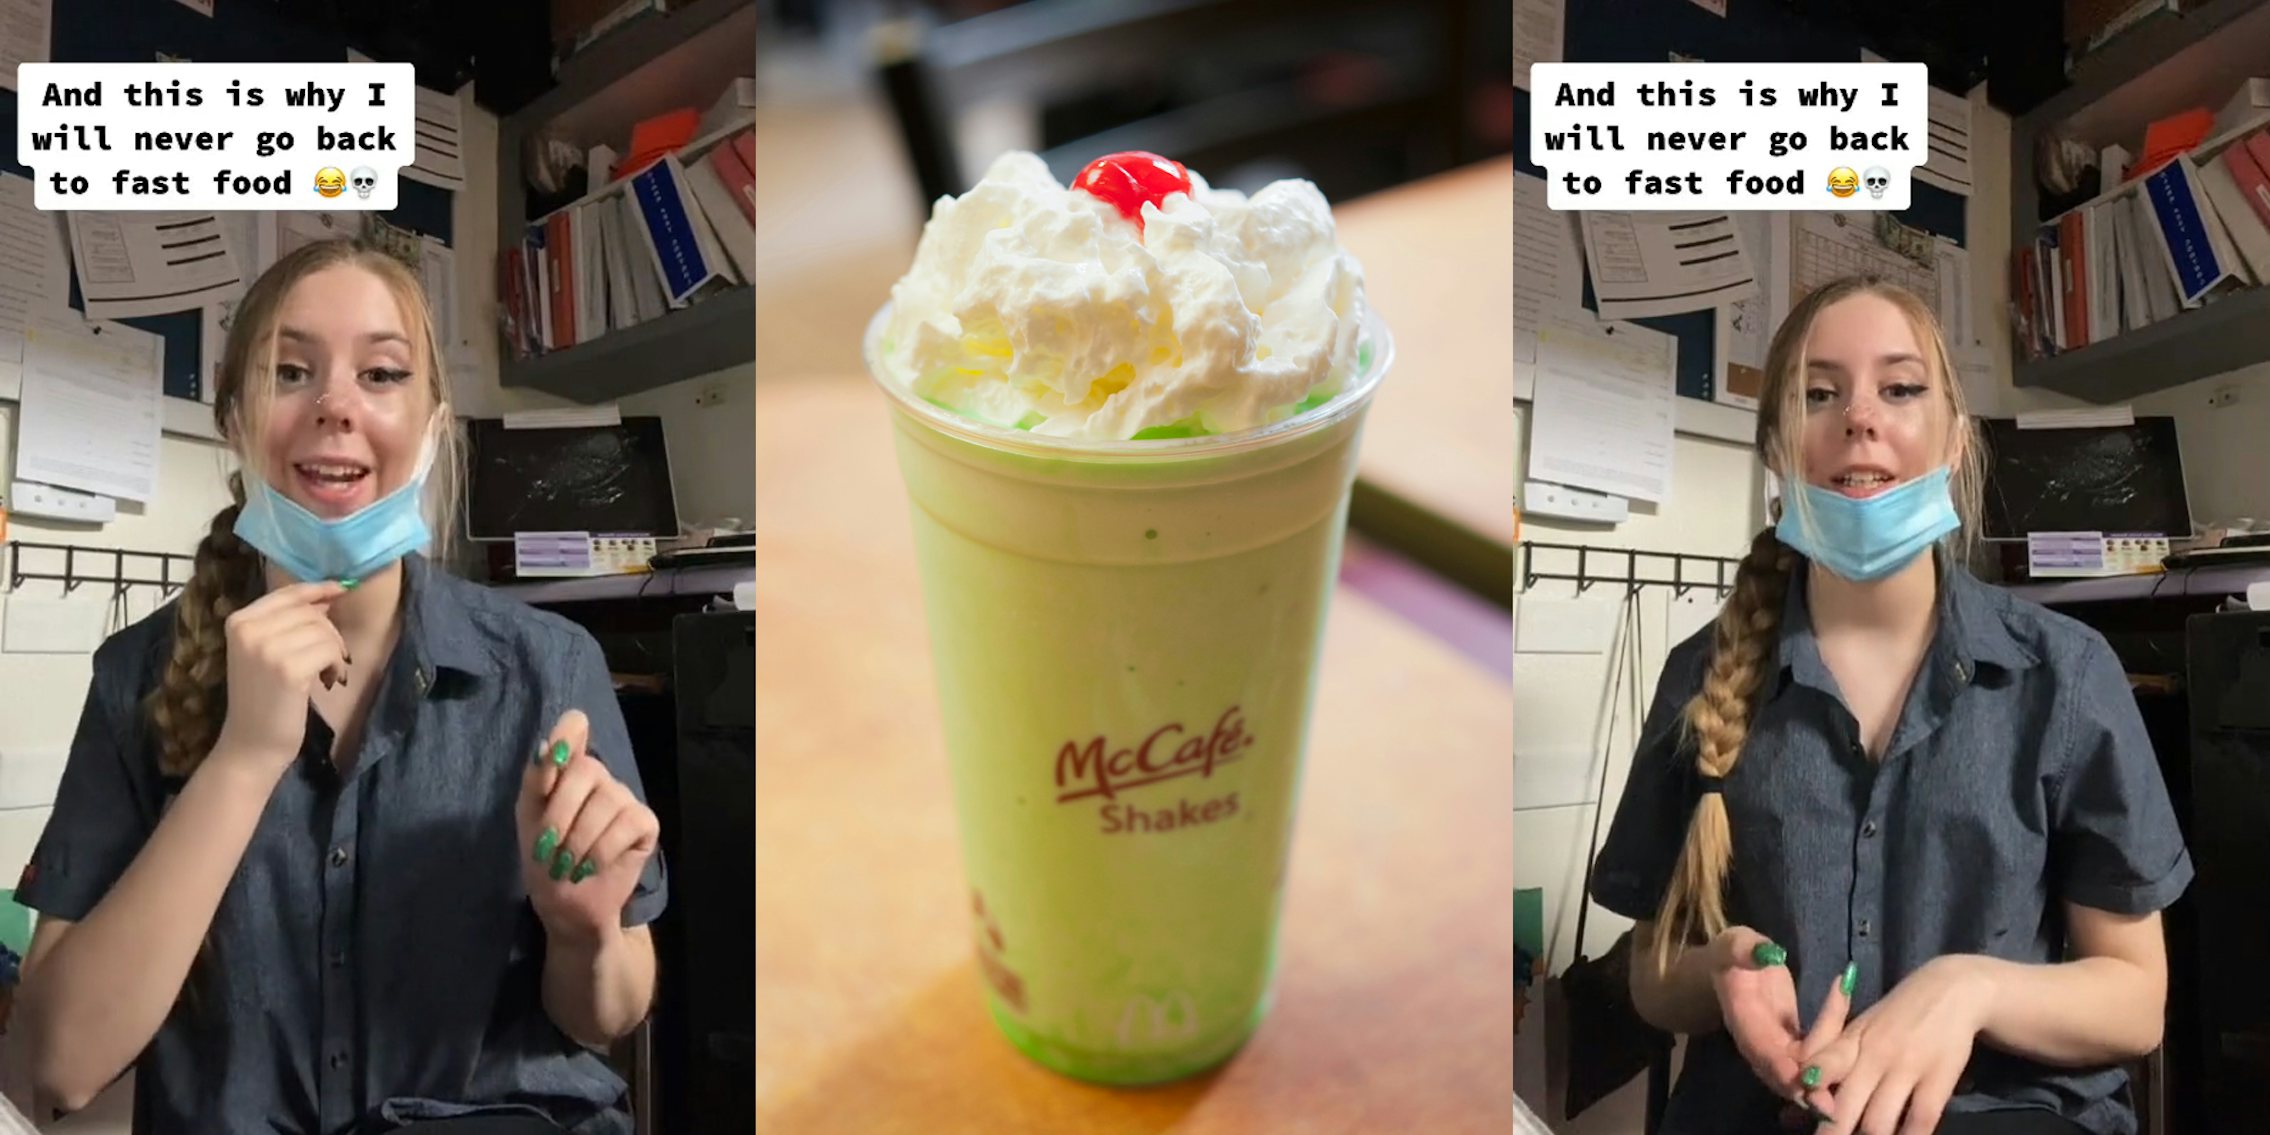 Former McDonald's employee speaking with hand up caption 'And this is why I will never go back to fast food' (l) McDonald's Shamrock Shake on table (c) Former McDonald's employee speaking with hand counting points caption 'And this is why I will never go back to fast food' (r)